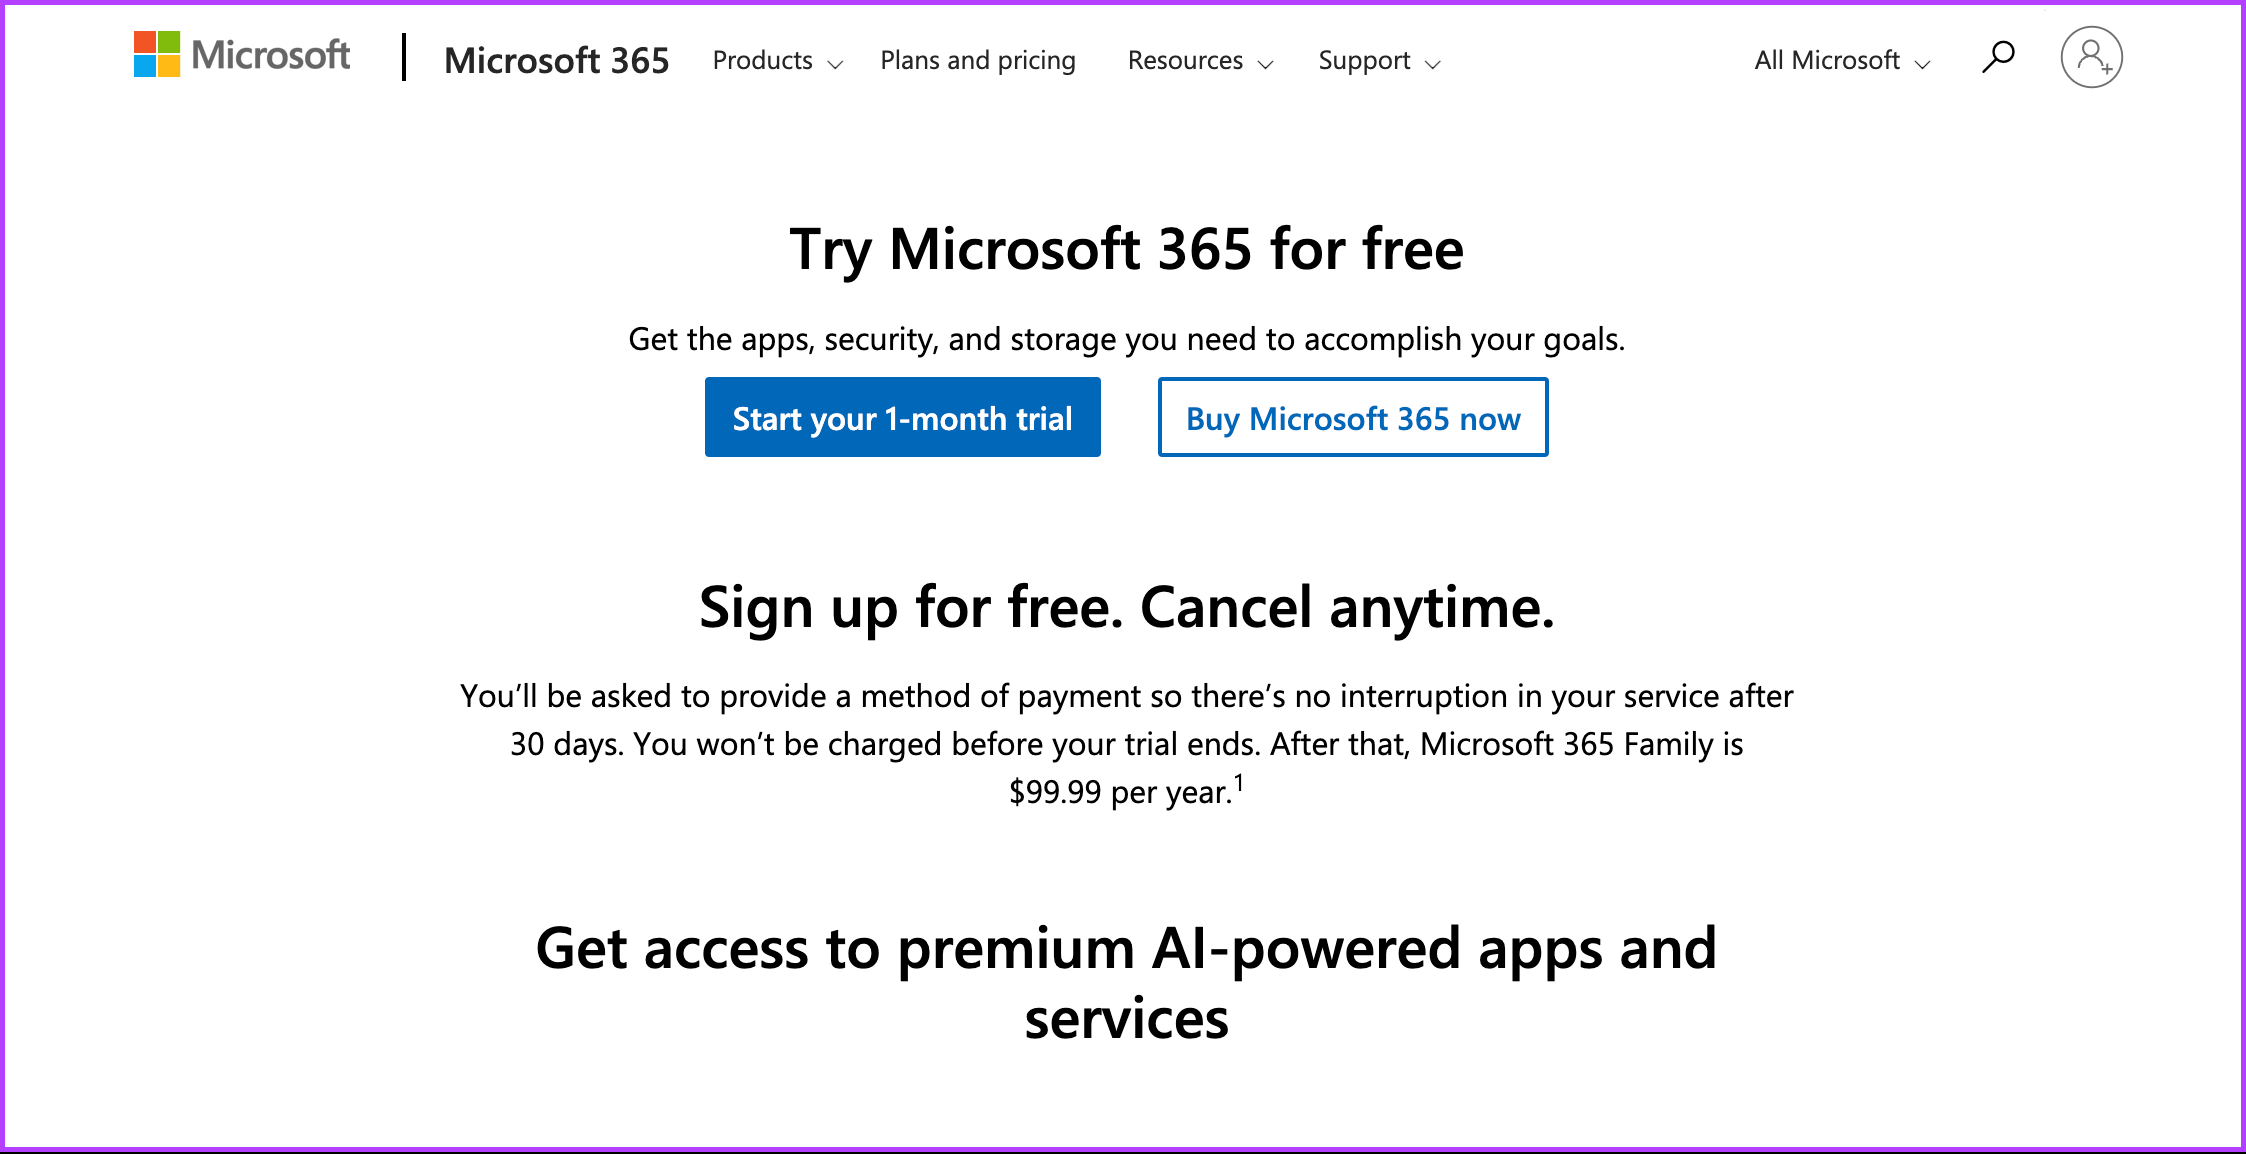 Sign Up for the Microsoft 365 Trial